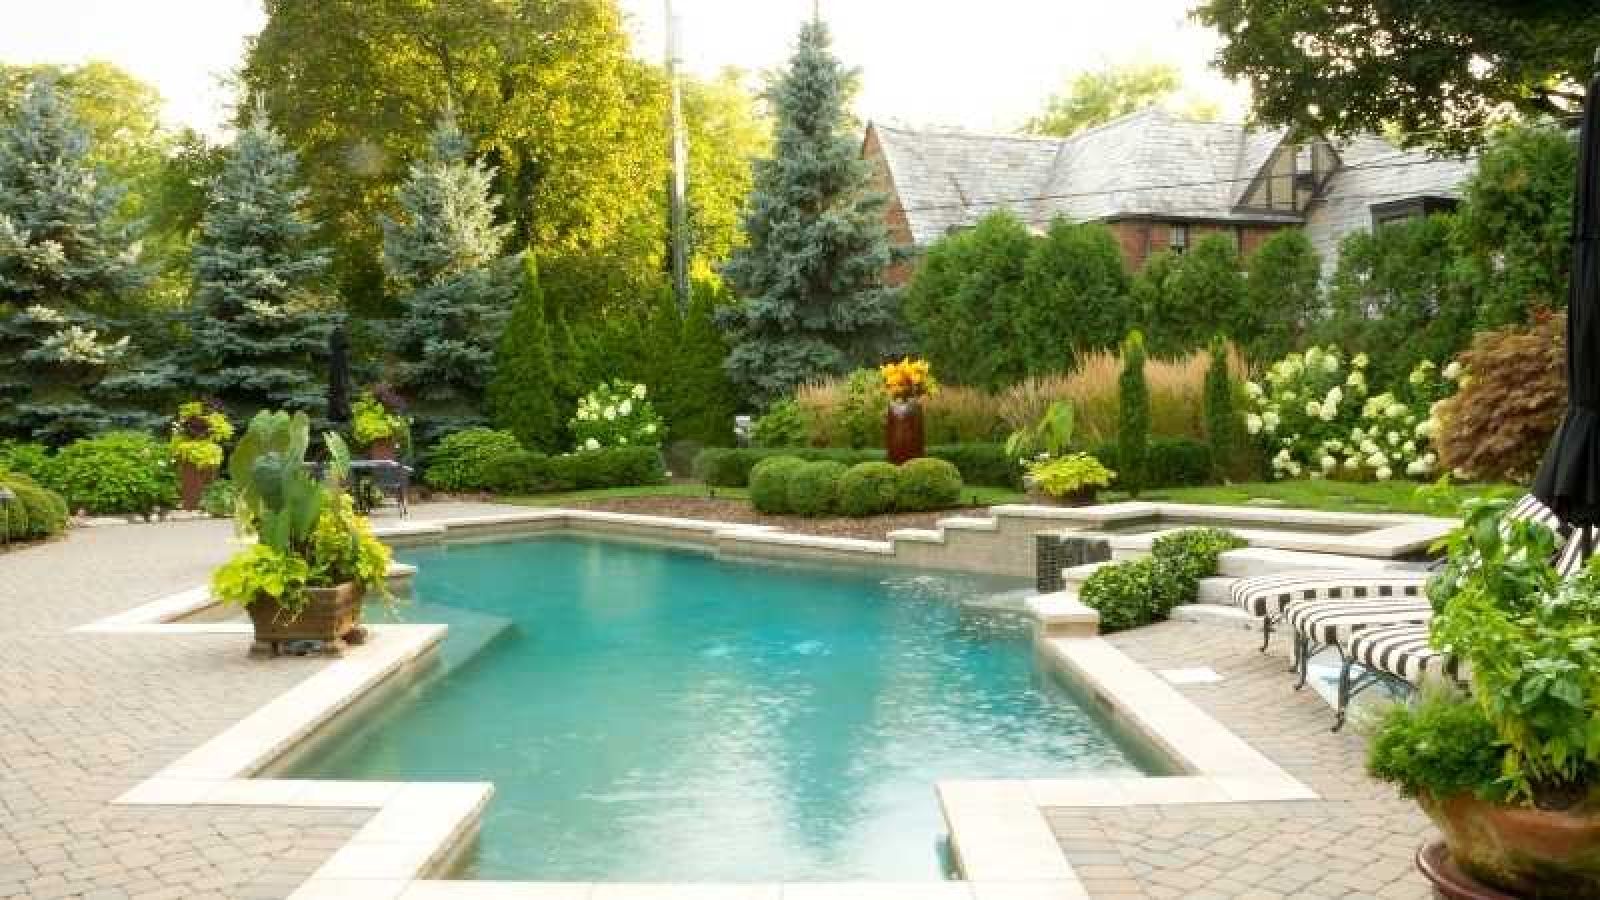 Freeform pool with beautiful plants, garden and sun in behind